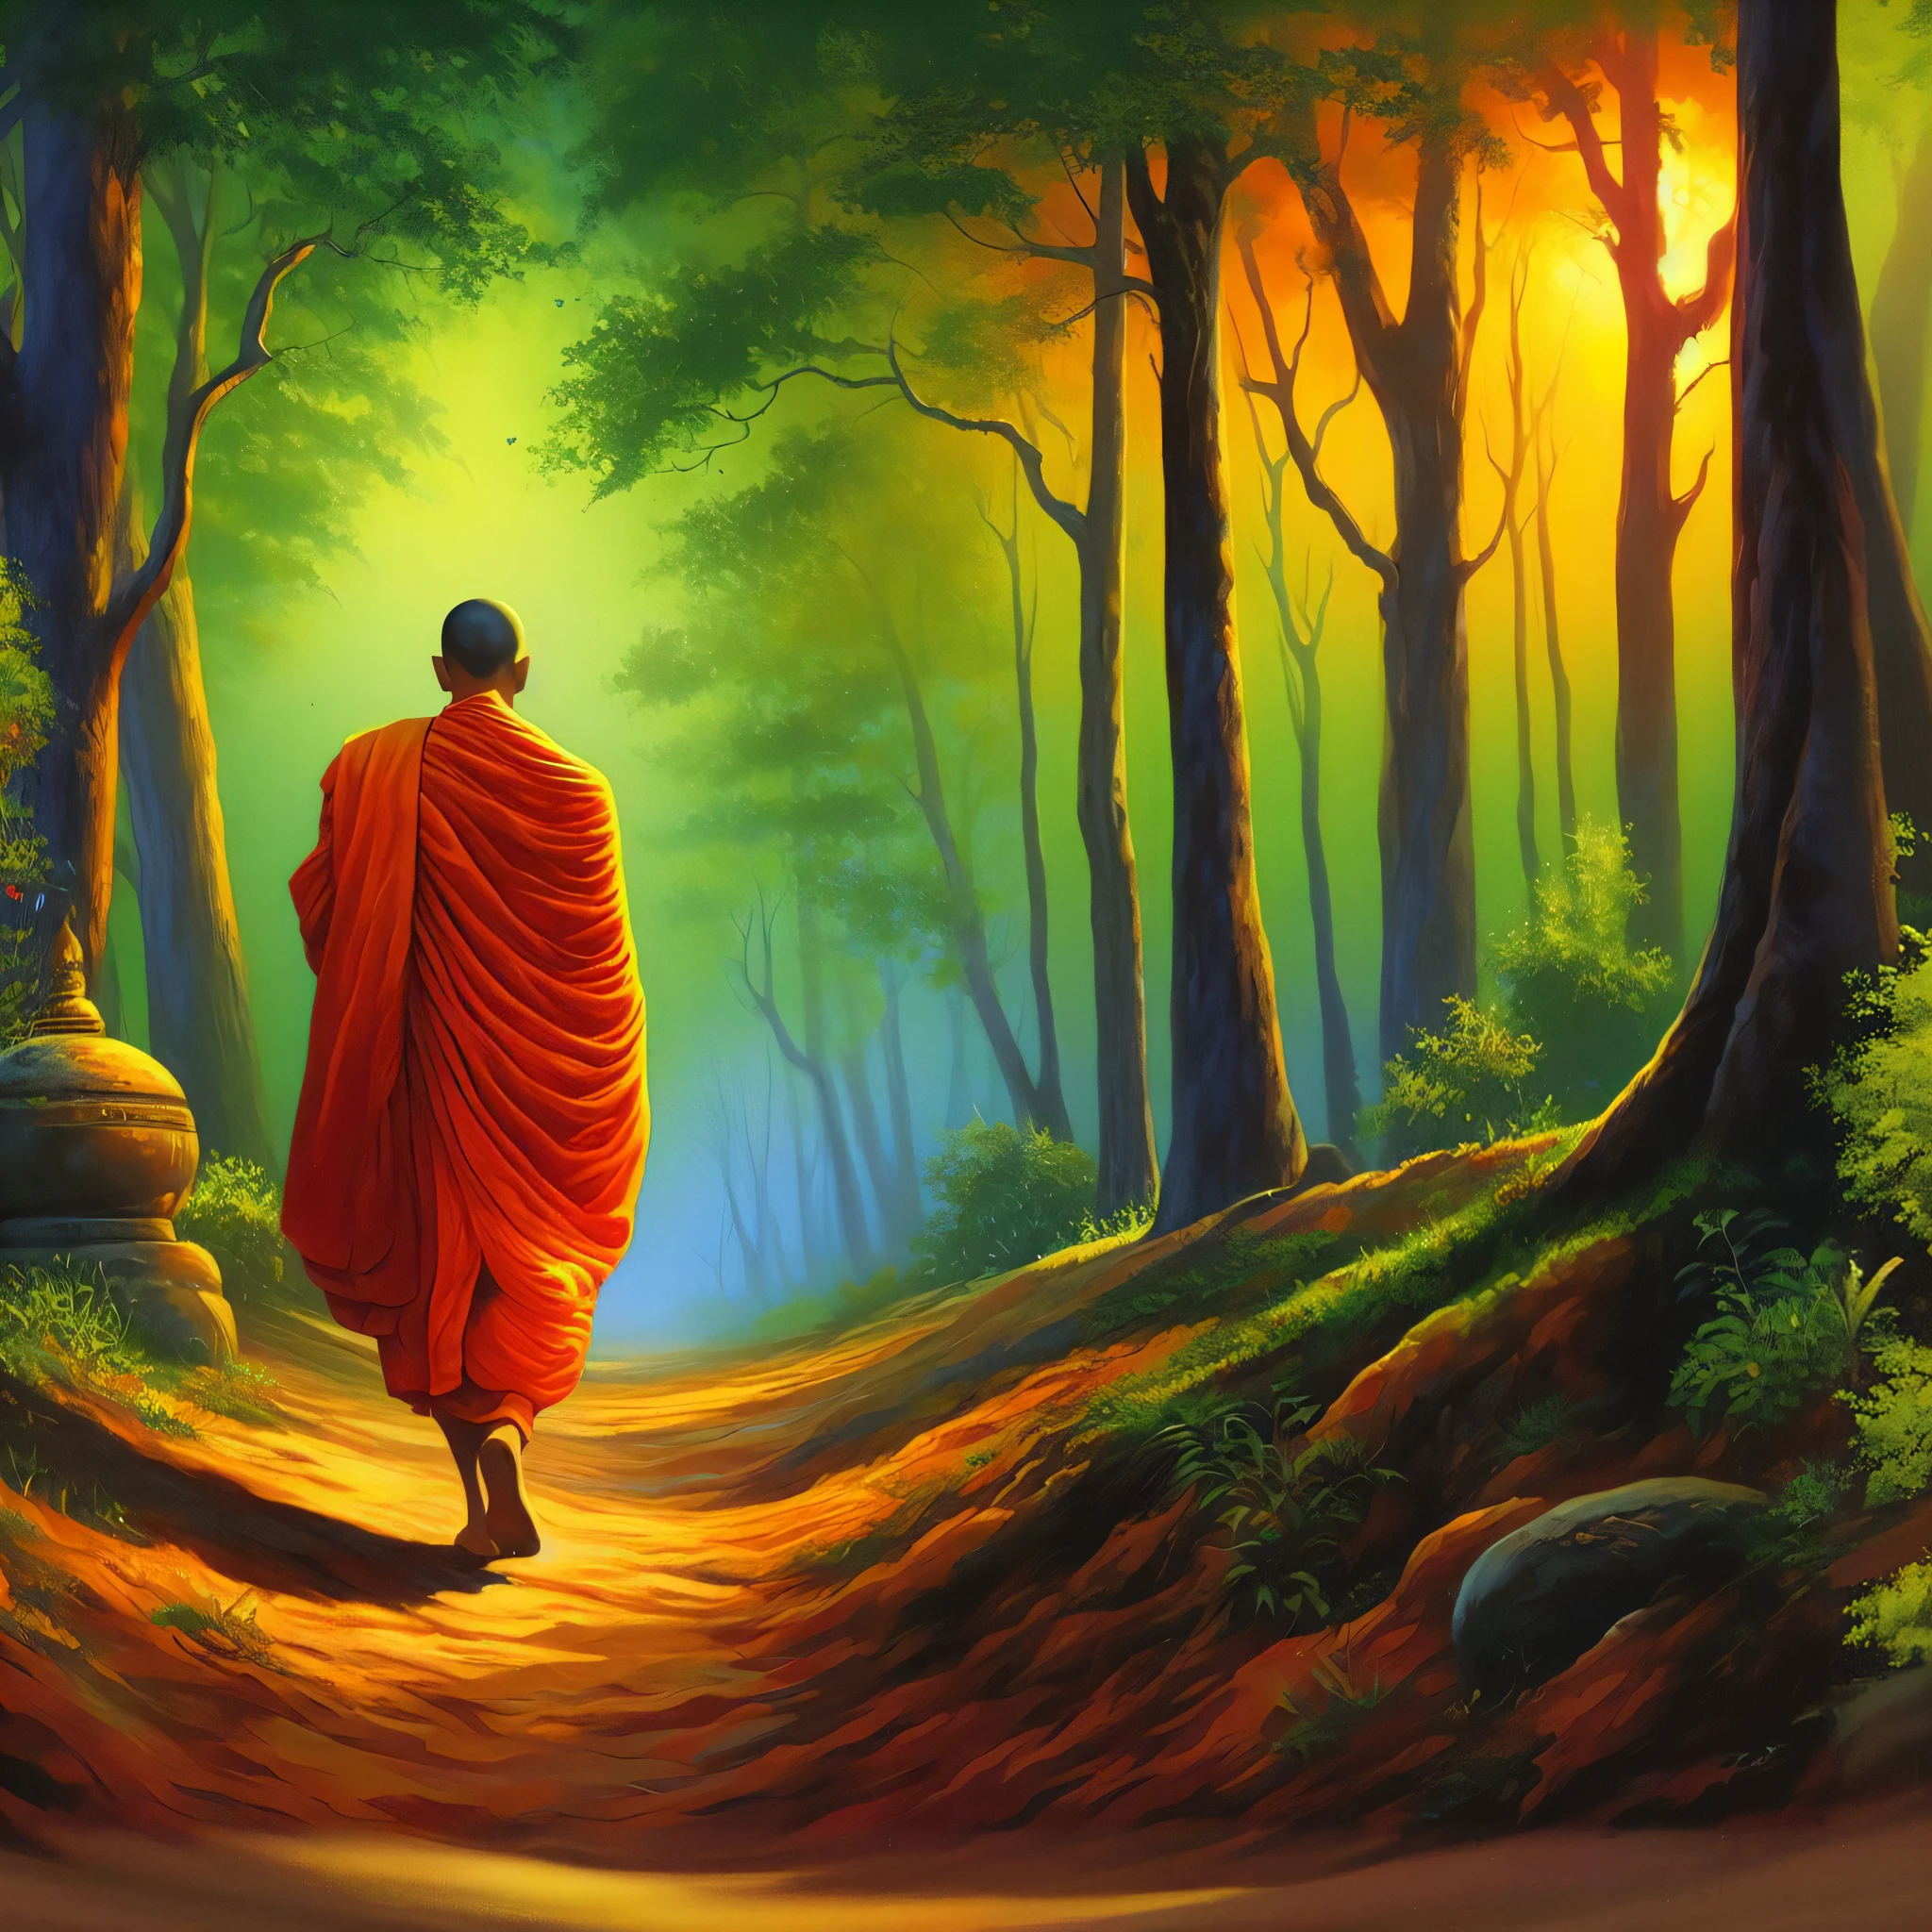 a painting of a monk walking down a path in a forest, on path to enlightenment, on the path to enlightenment, monk meditate, buddhist monk, buddhism, buddhist, monk, buddhist monk meditating, on forest path, enlightenment, 2 1 st century monk, spiritual enlightenment, an ancient path, portrait of monk, concept art of a monk, oil on canvas painting